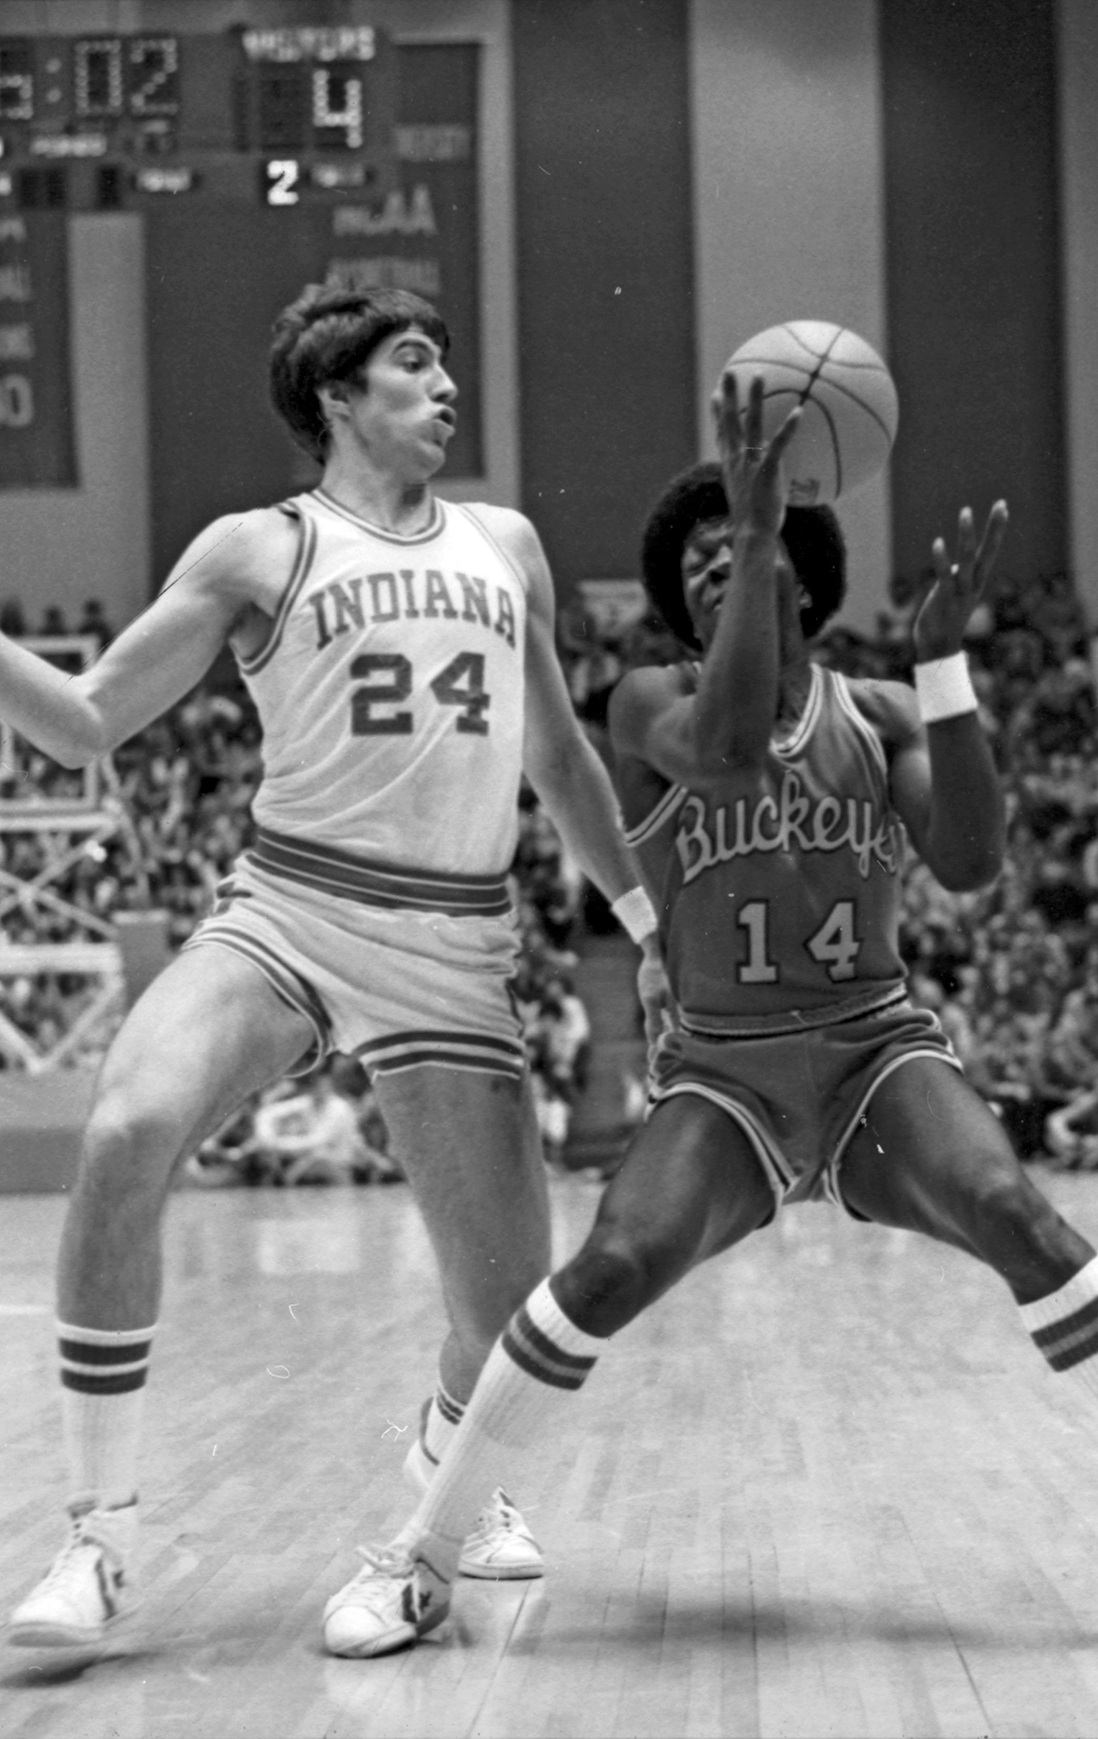 Randy Wittman (24) had a great career at Indiana, but he was injured early in the 1979-80 season and was out for the season. (IU Archive)